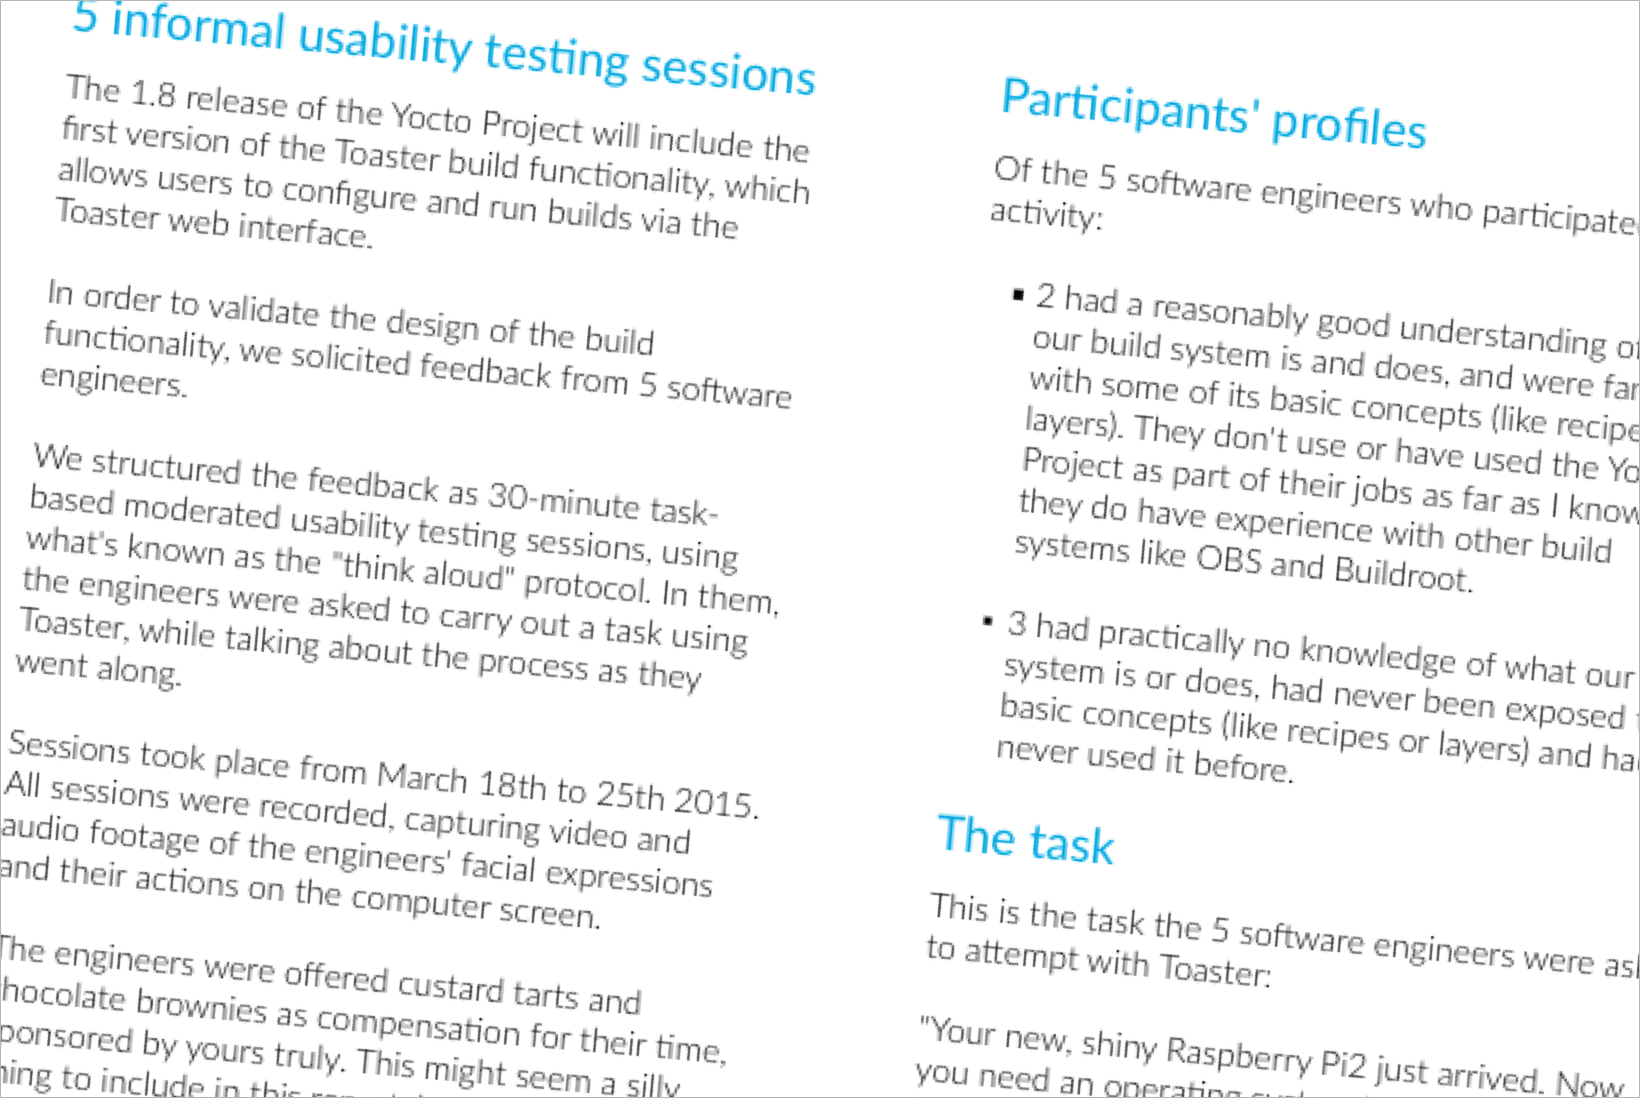 A still frame from the video of a usability testing session